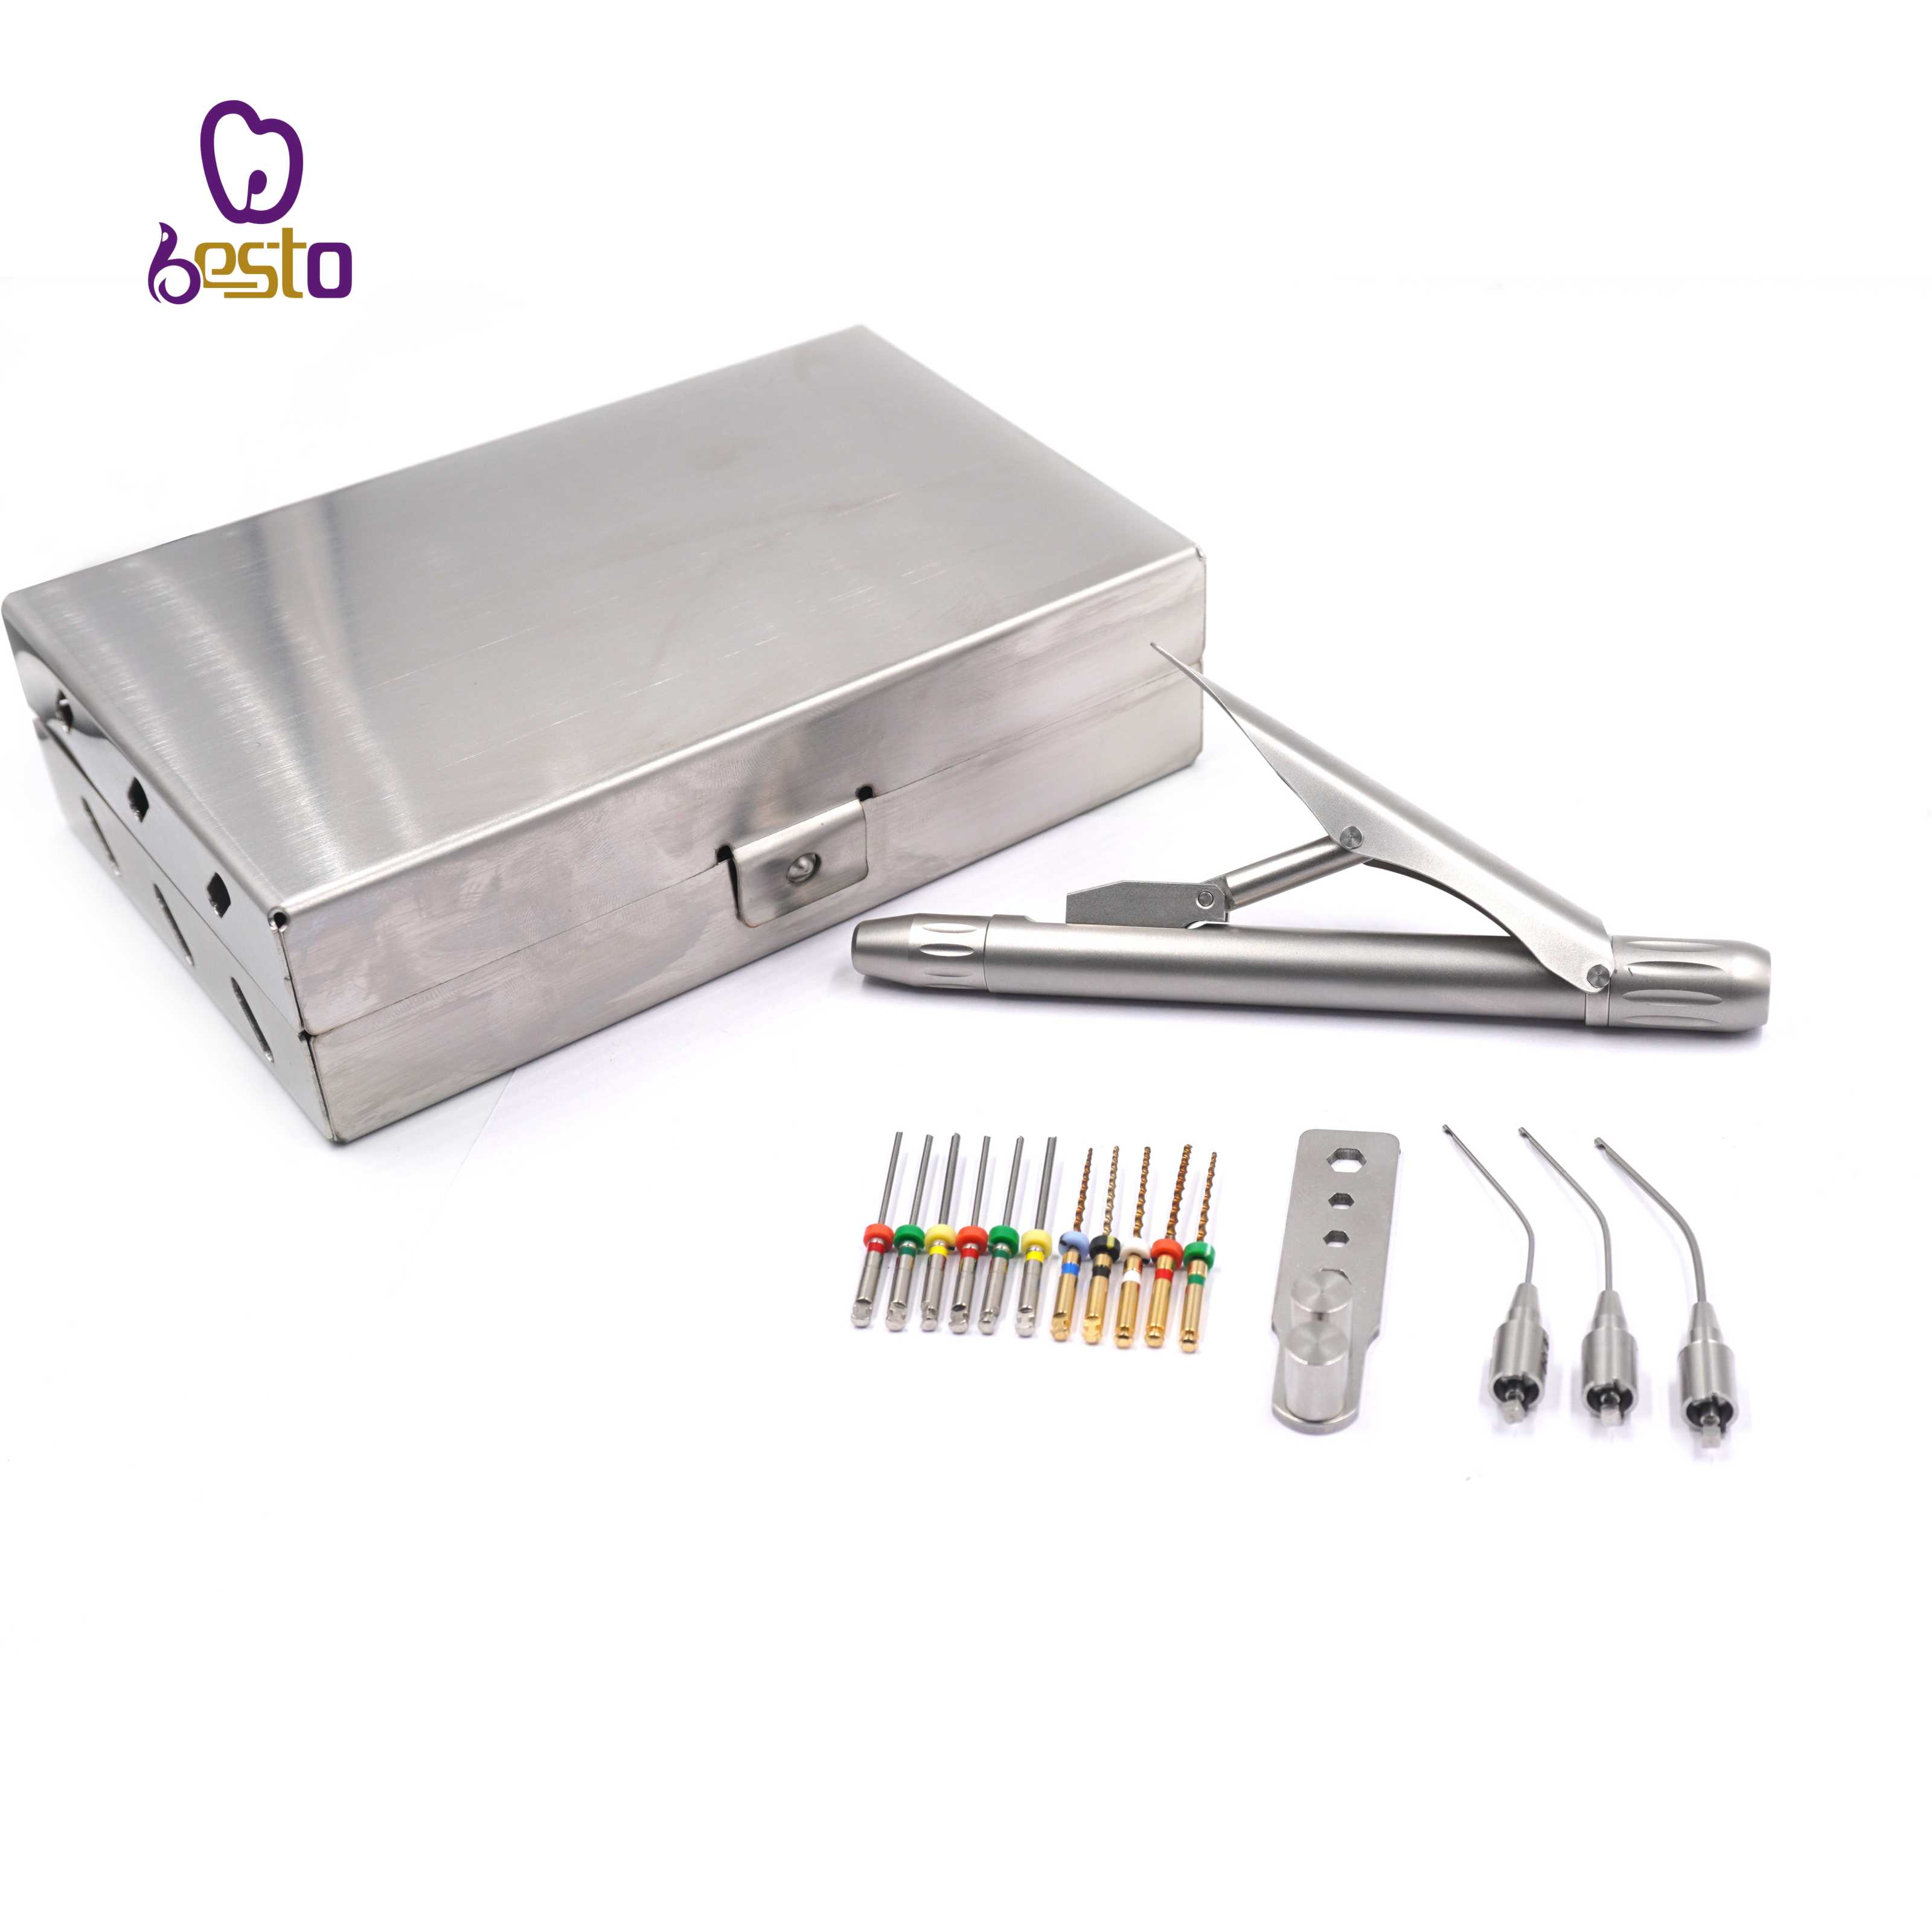 Dental Root Canal File Extractor Set Endo Removal System Kit Dentist Micro Broken Files Instrument Dentistry Equipment